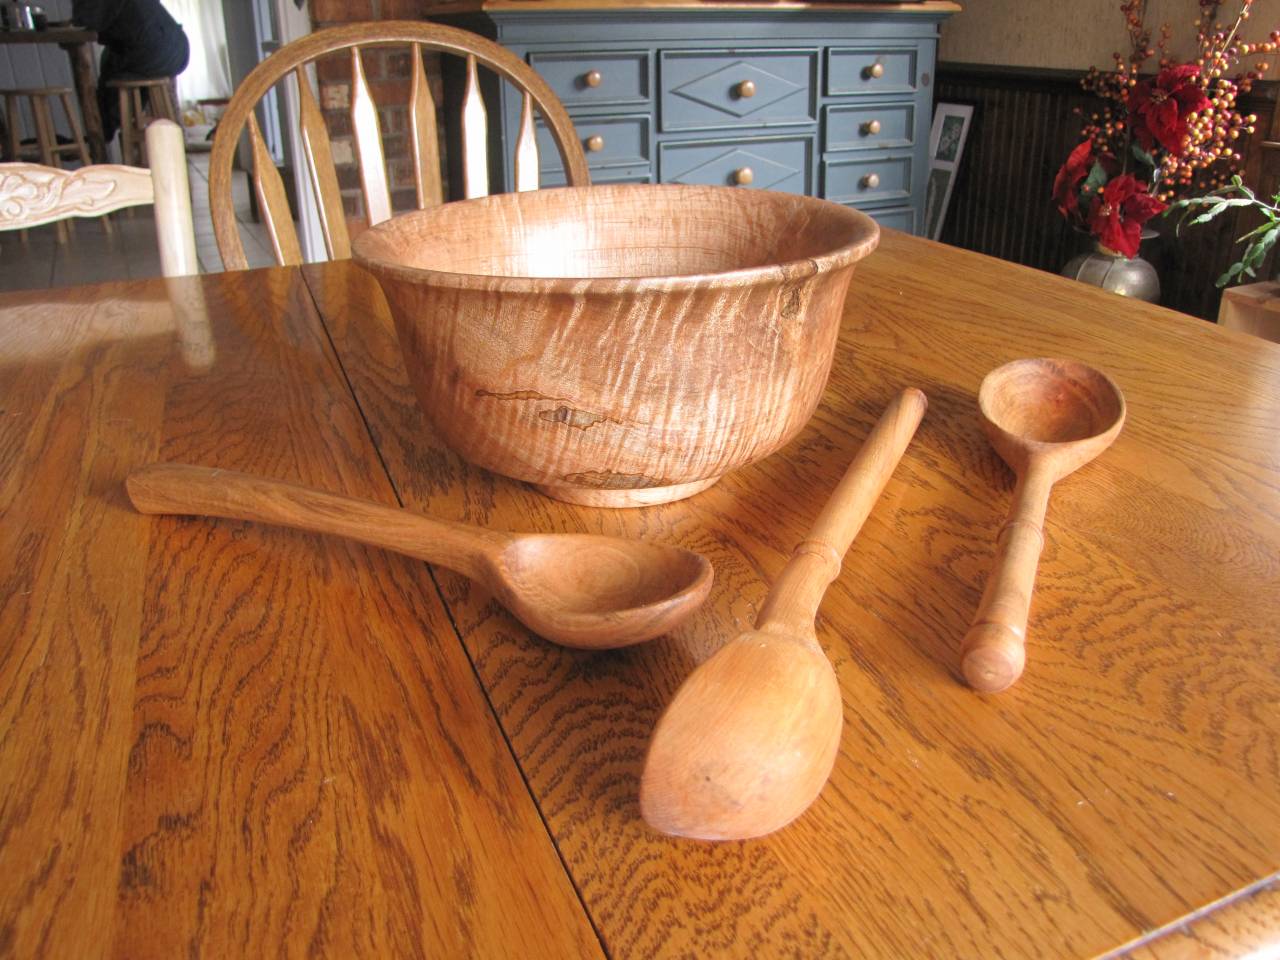 Sycamore Spoons and Bowl